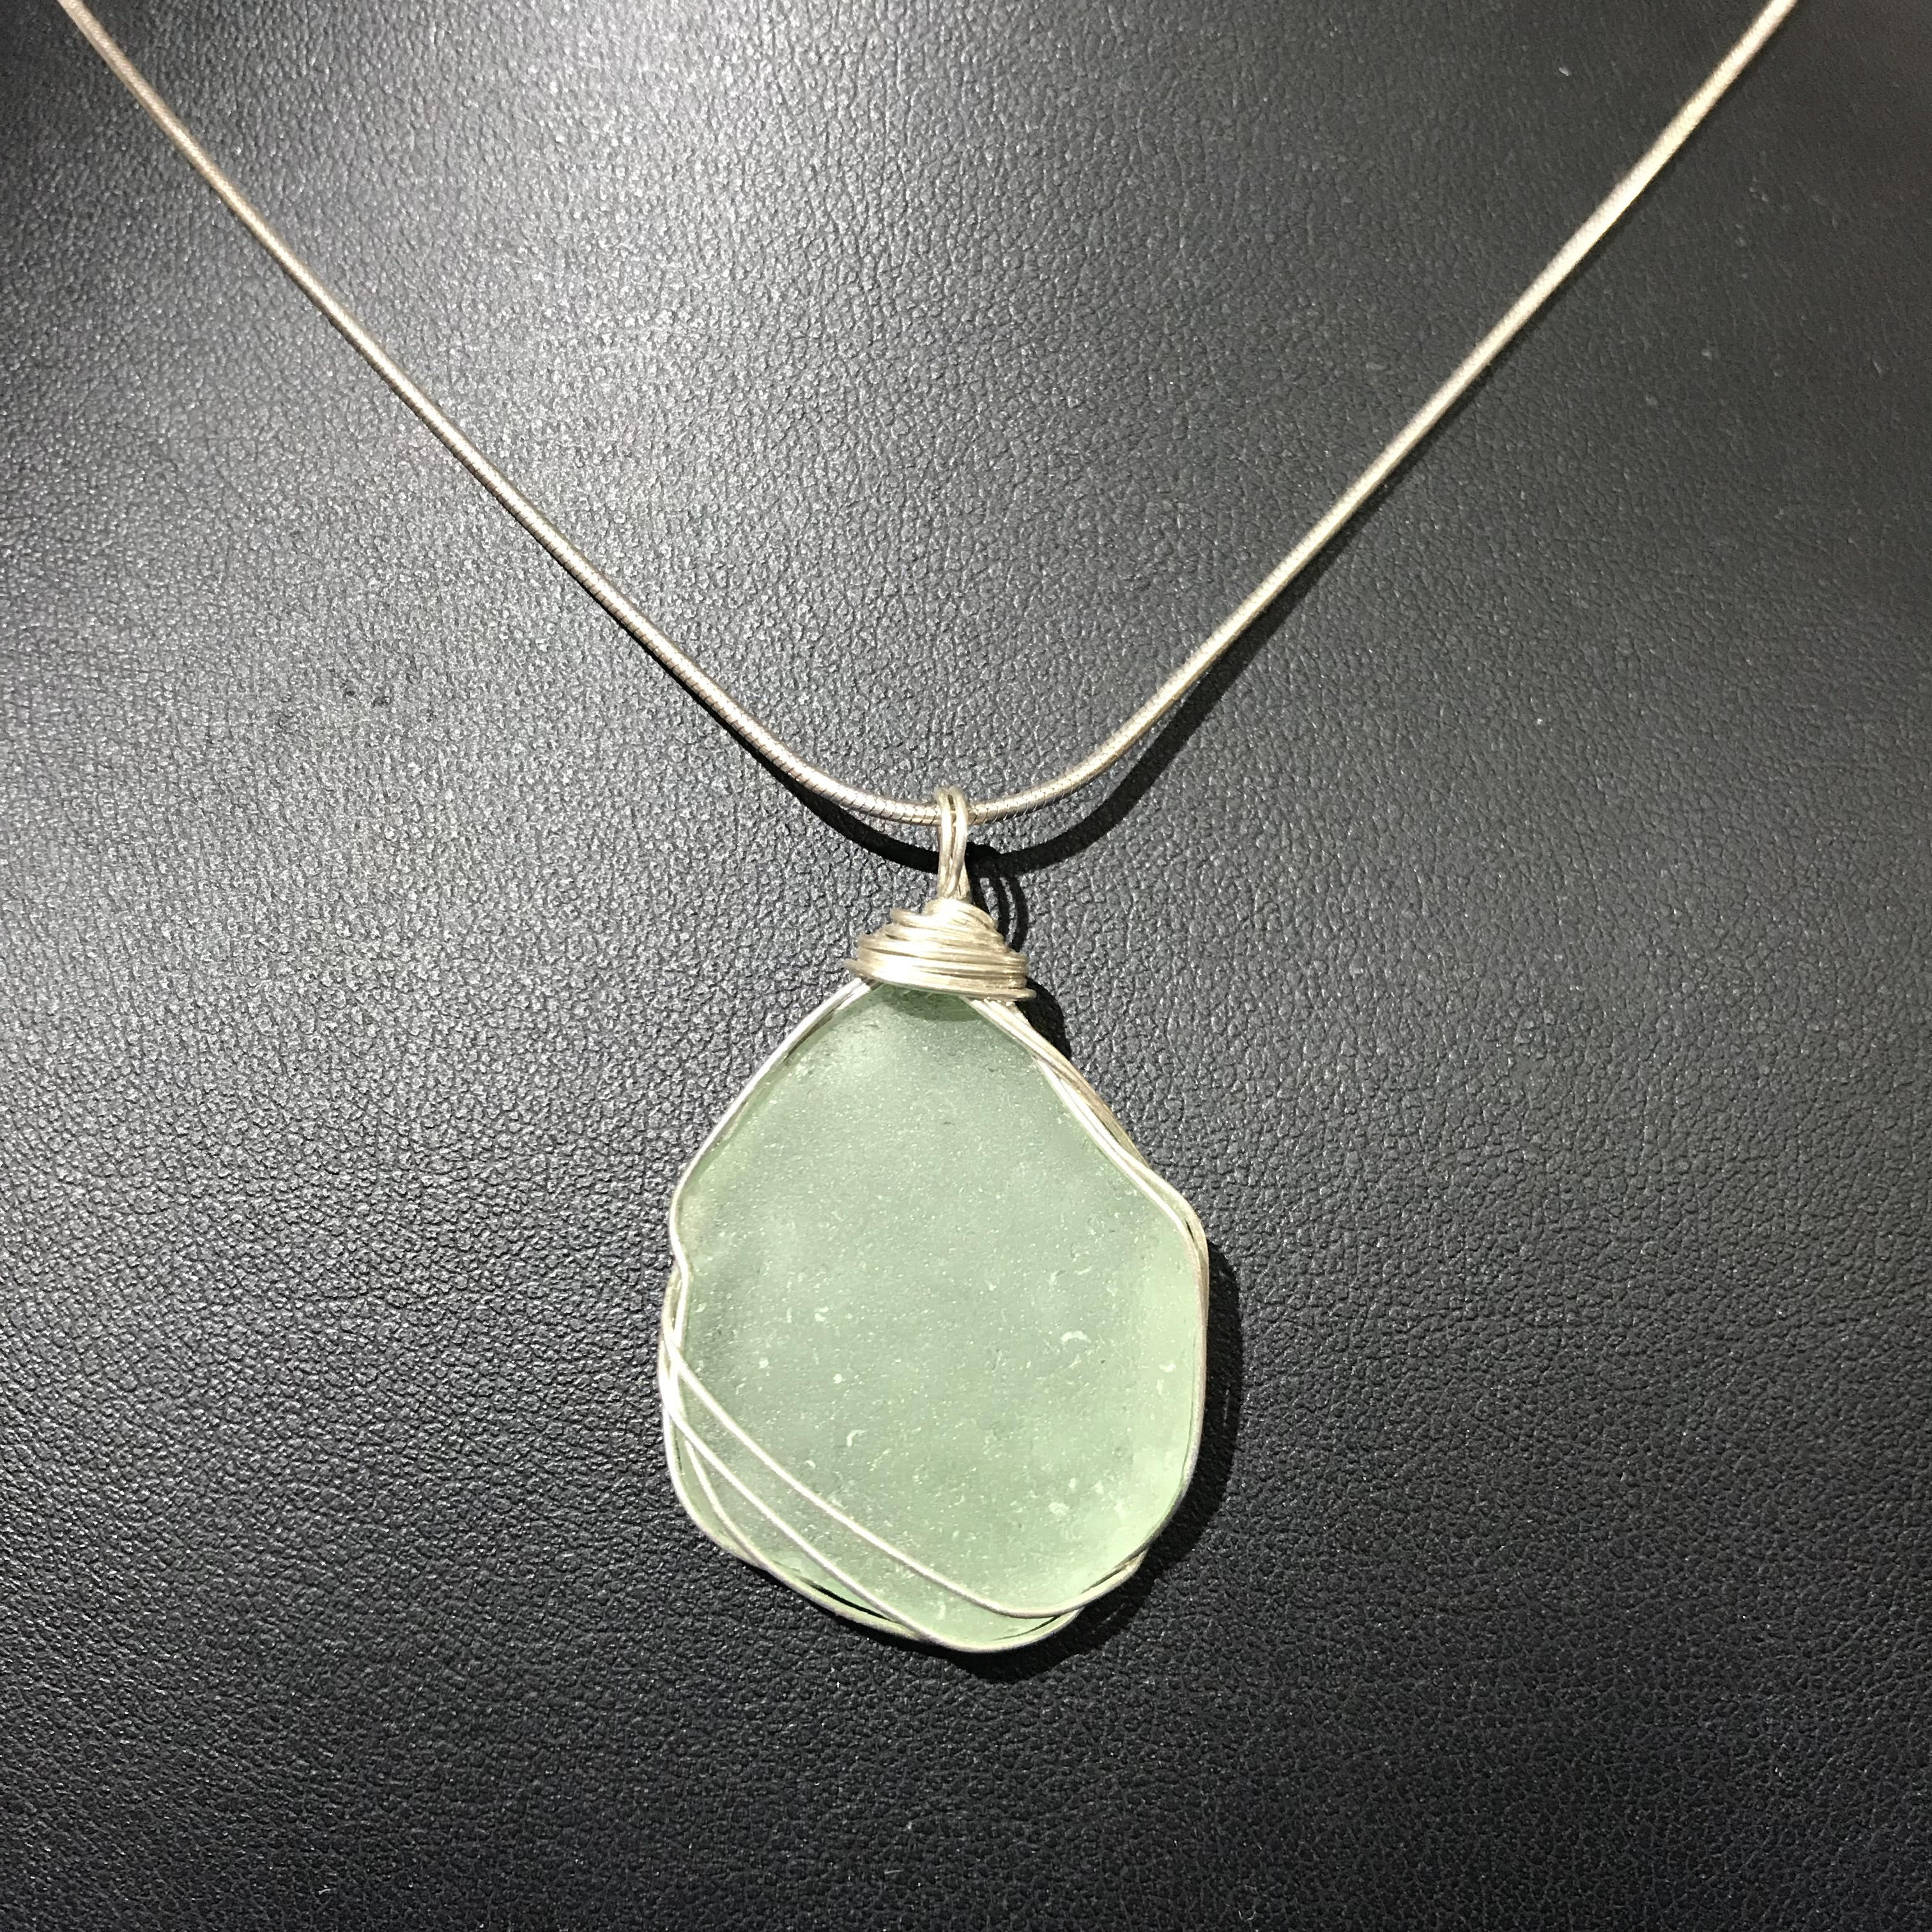 Handmade Top Drilled Sea Glass Pendant Necklace with Adjustable Waxed Cord 